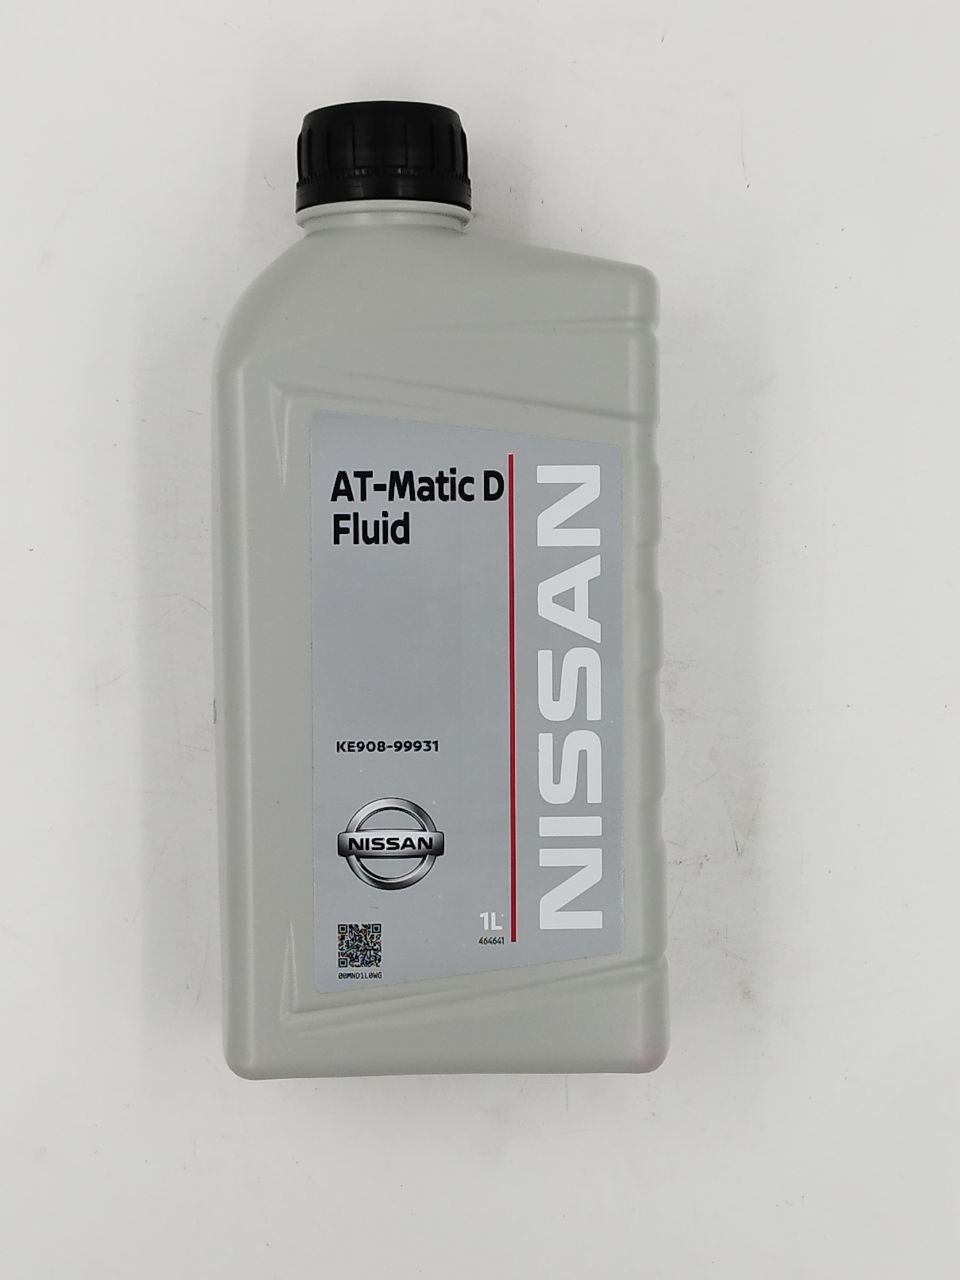 Масло nissan atf matic. Nissan matic Fluid d 1 л. Nissan ke908-99931-r. Nissan ATF matic d Fluid. Nissan at-matic d 1л.